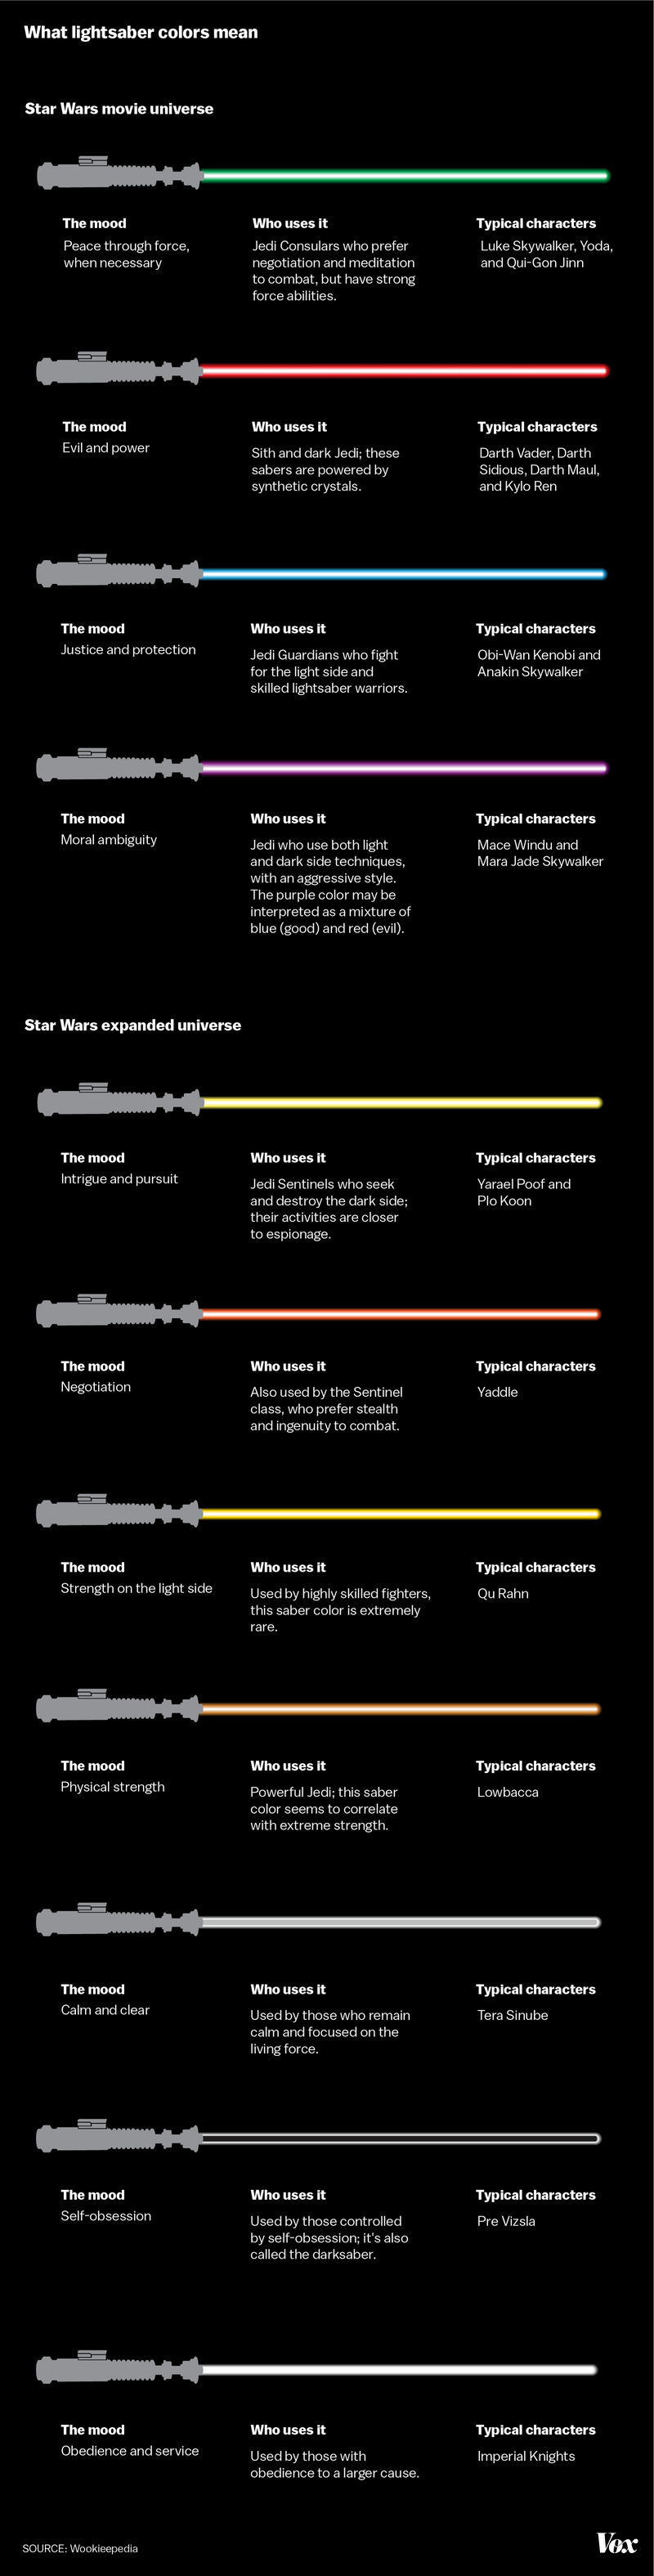 Every lightsaber color in the Star Wars universe.